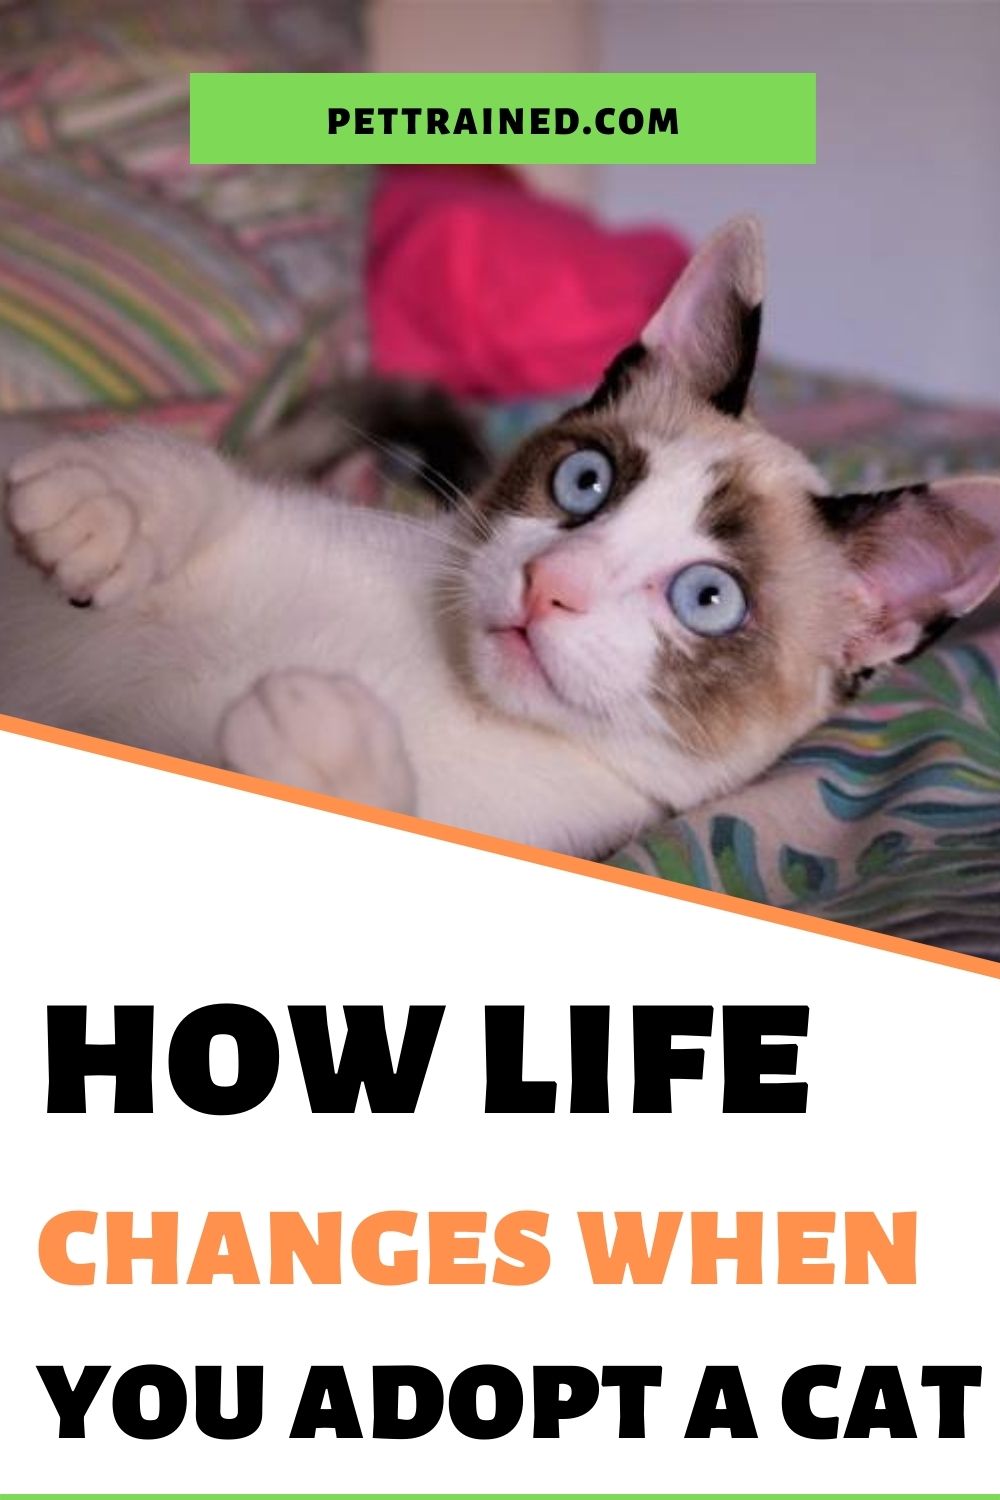 How your life changes when you adopt a cat